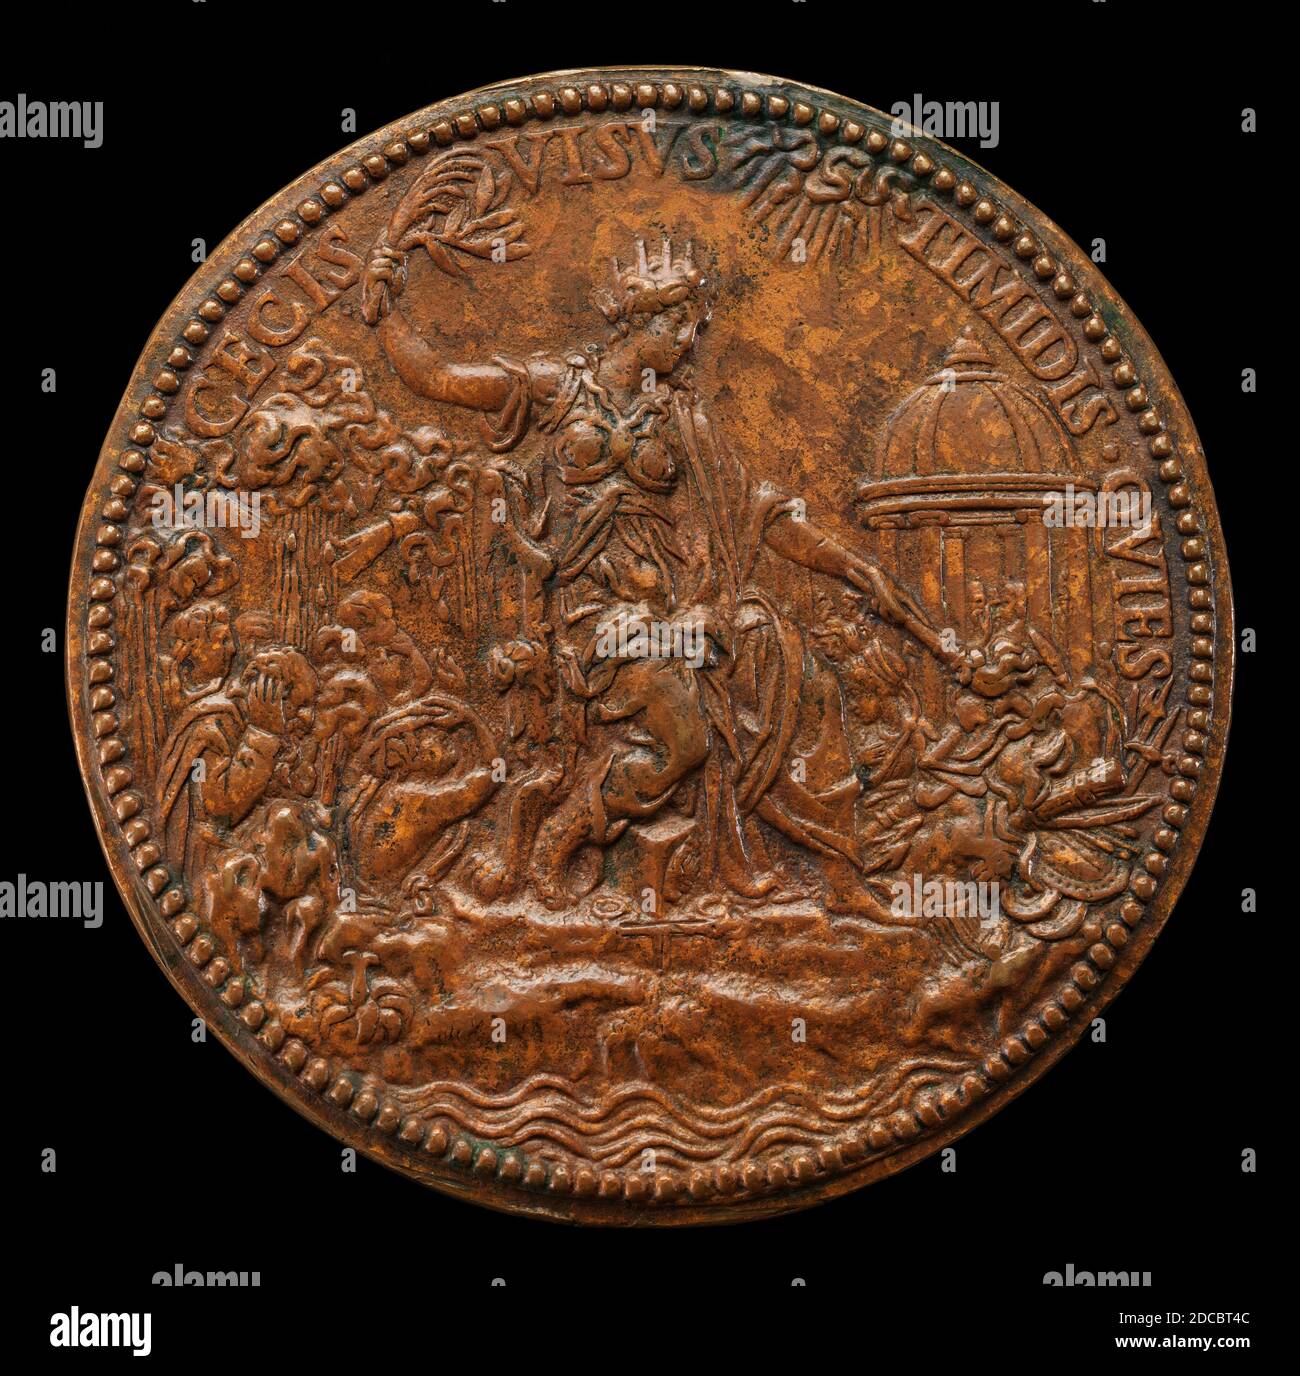 Jacopo Nizzola da Trezzo, (artist), Milanese, 1515/1519 - 1589, Mary as Peace Setting Fire to Arms, 1555, bronze, overall (diameter): 6.81 cm (2 11/16 in.), gross weight: 98.95 gr (0.218 lb.), axis: 12:00 Stock Photo